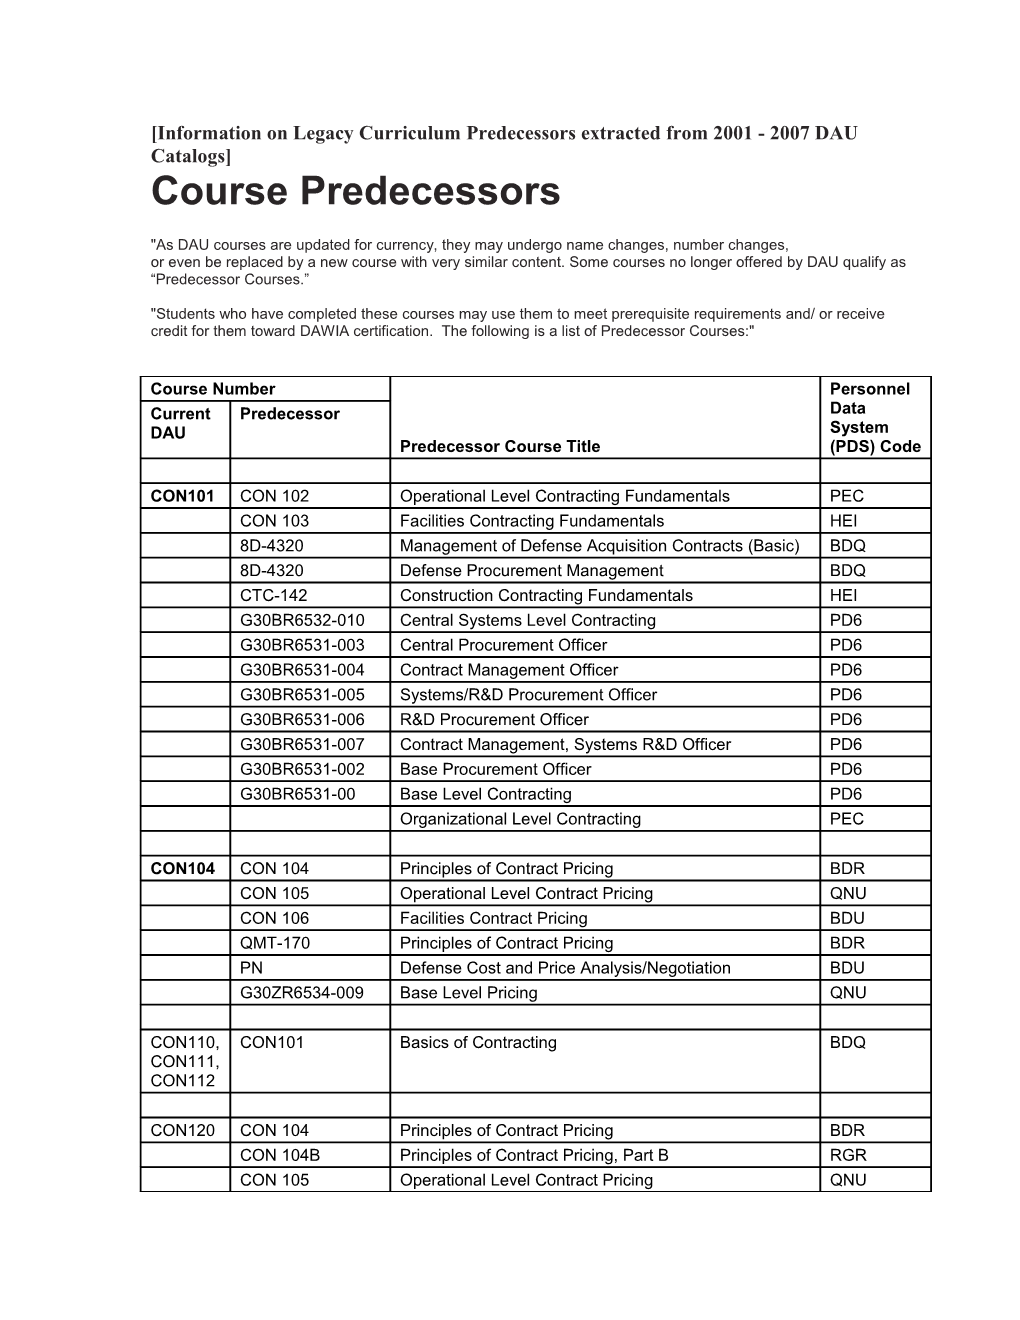 Information on Legacy Curriculum Predecessors Extracted from 2001 - 2007 DAU Catalogs